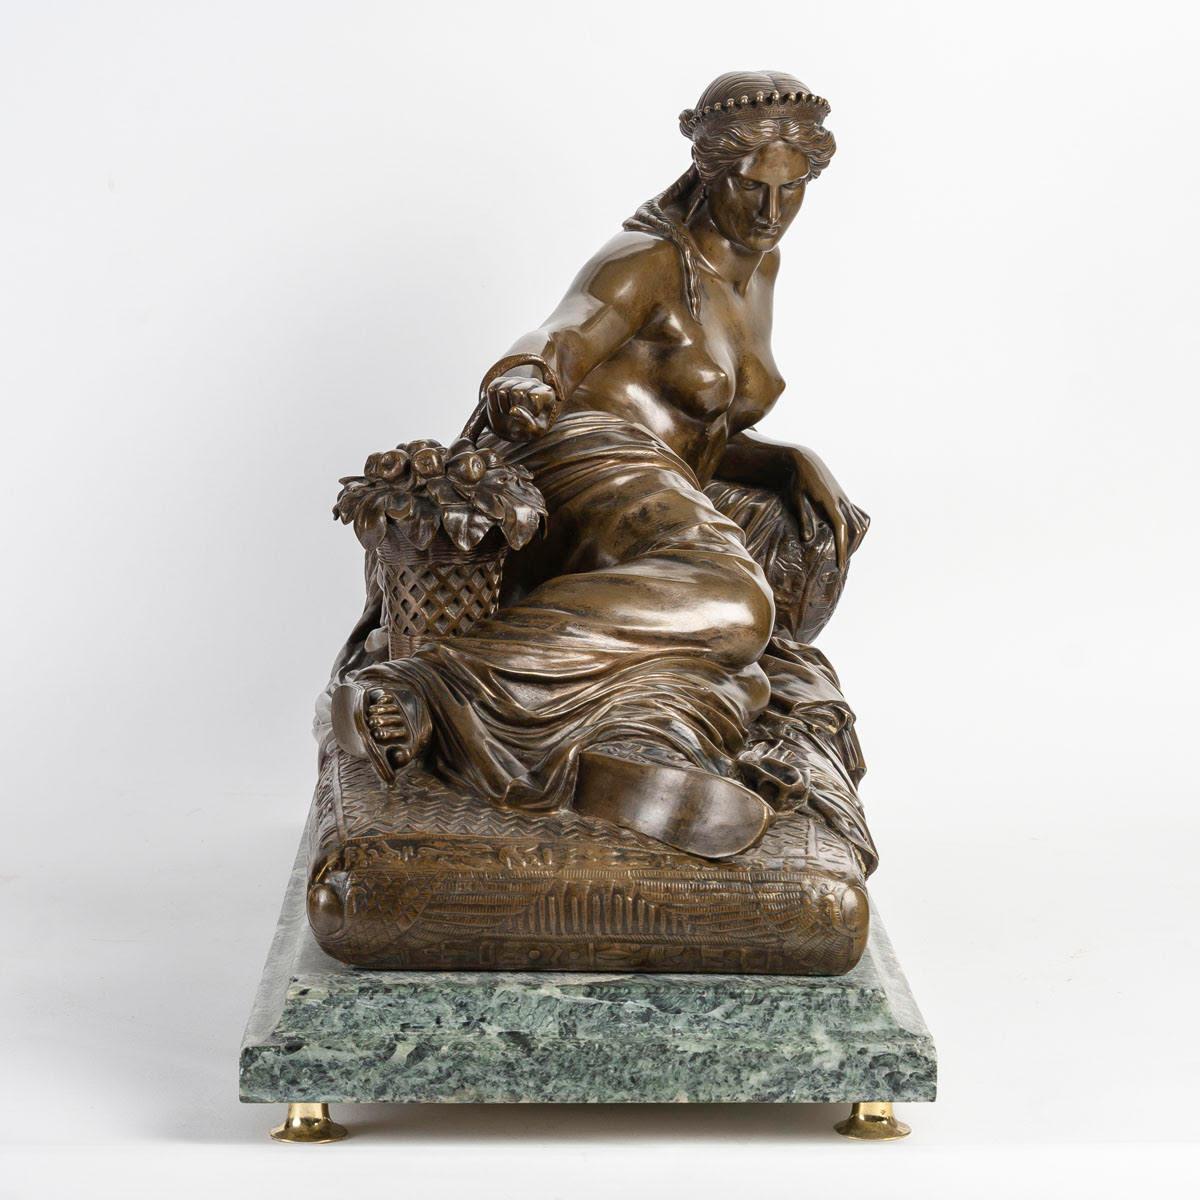 Bronze Sculpture of Cleopatra Reclining, Sculpture Signed Barbedienne, Napoleon Period. For Sale